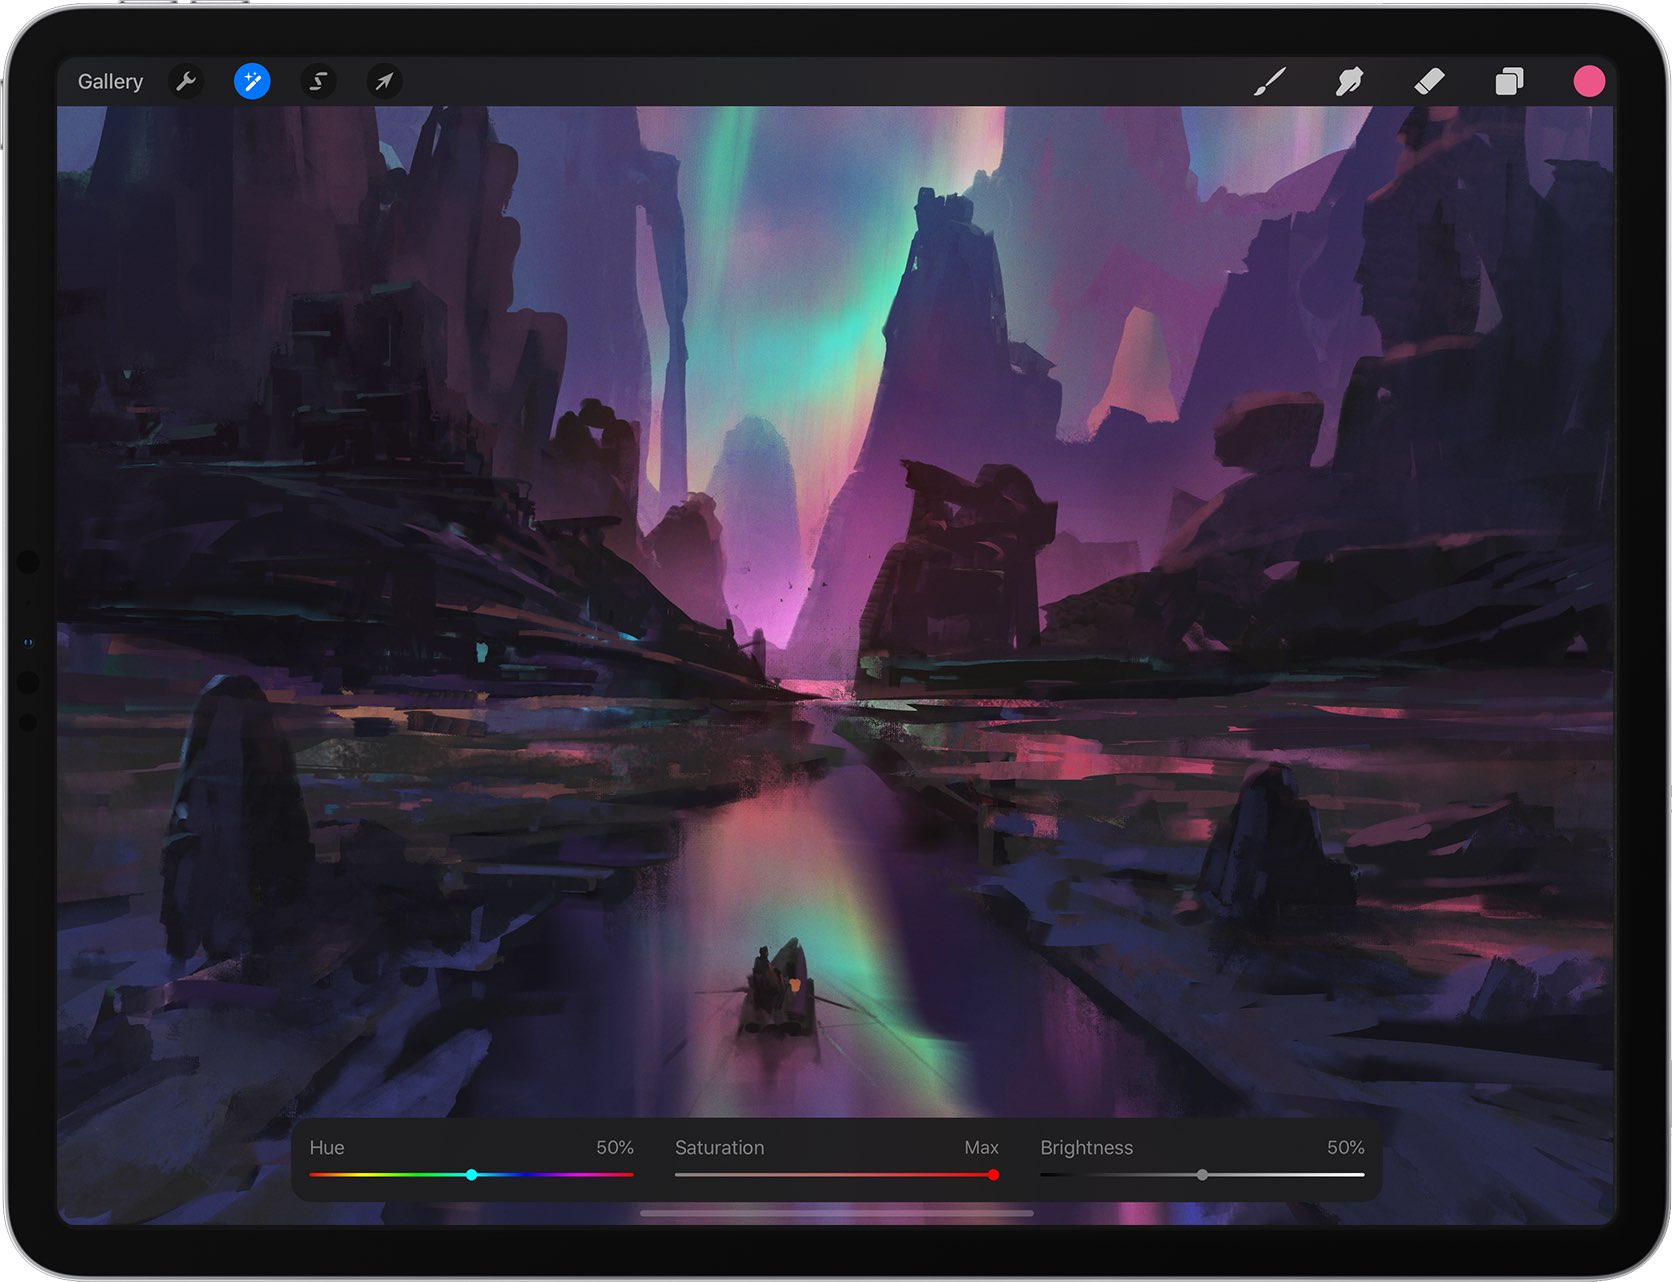 An iPad screenshot showing the new features in version 5.0 of the Procreate art app